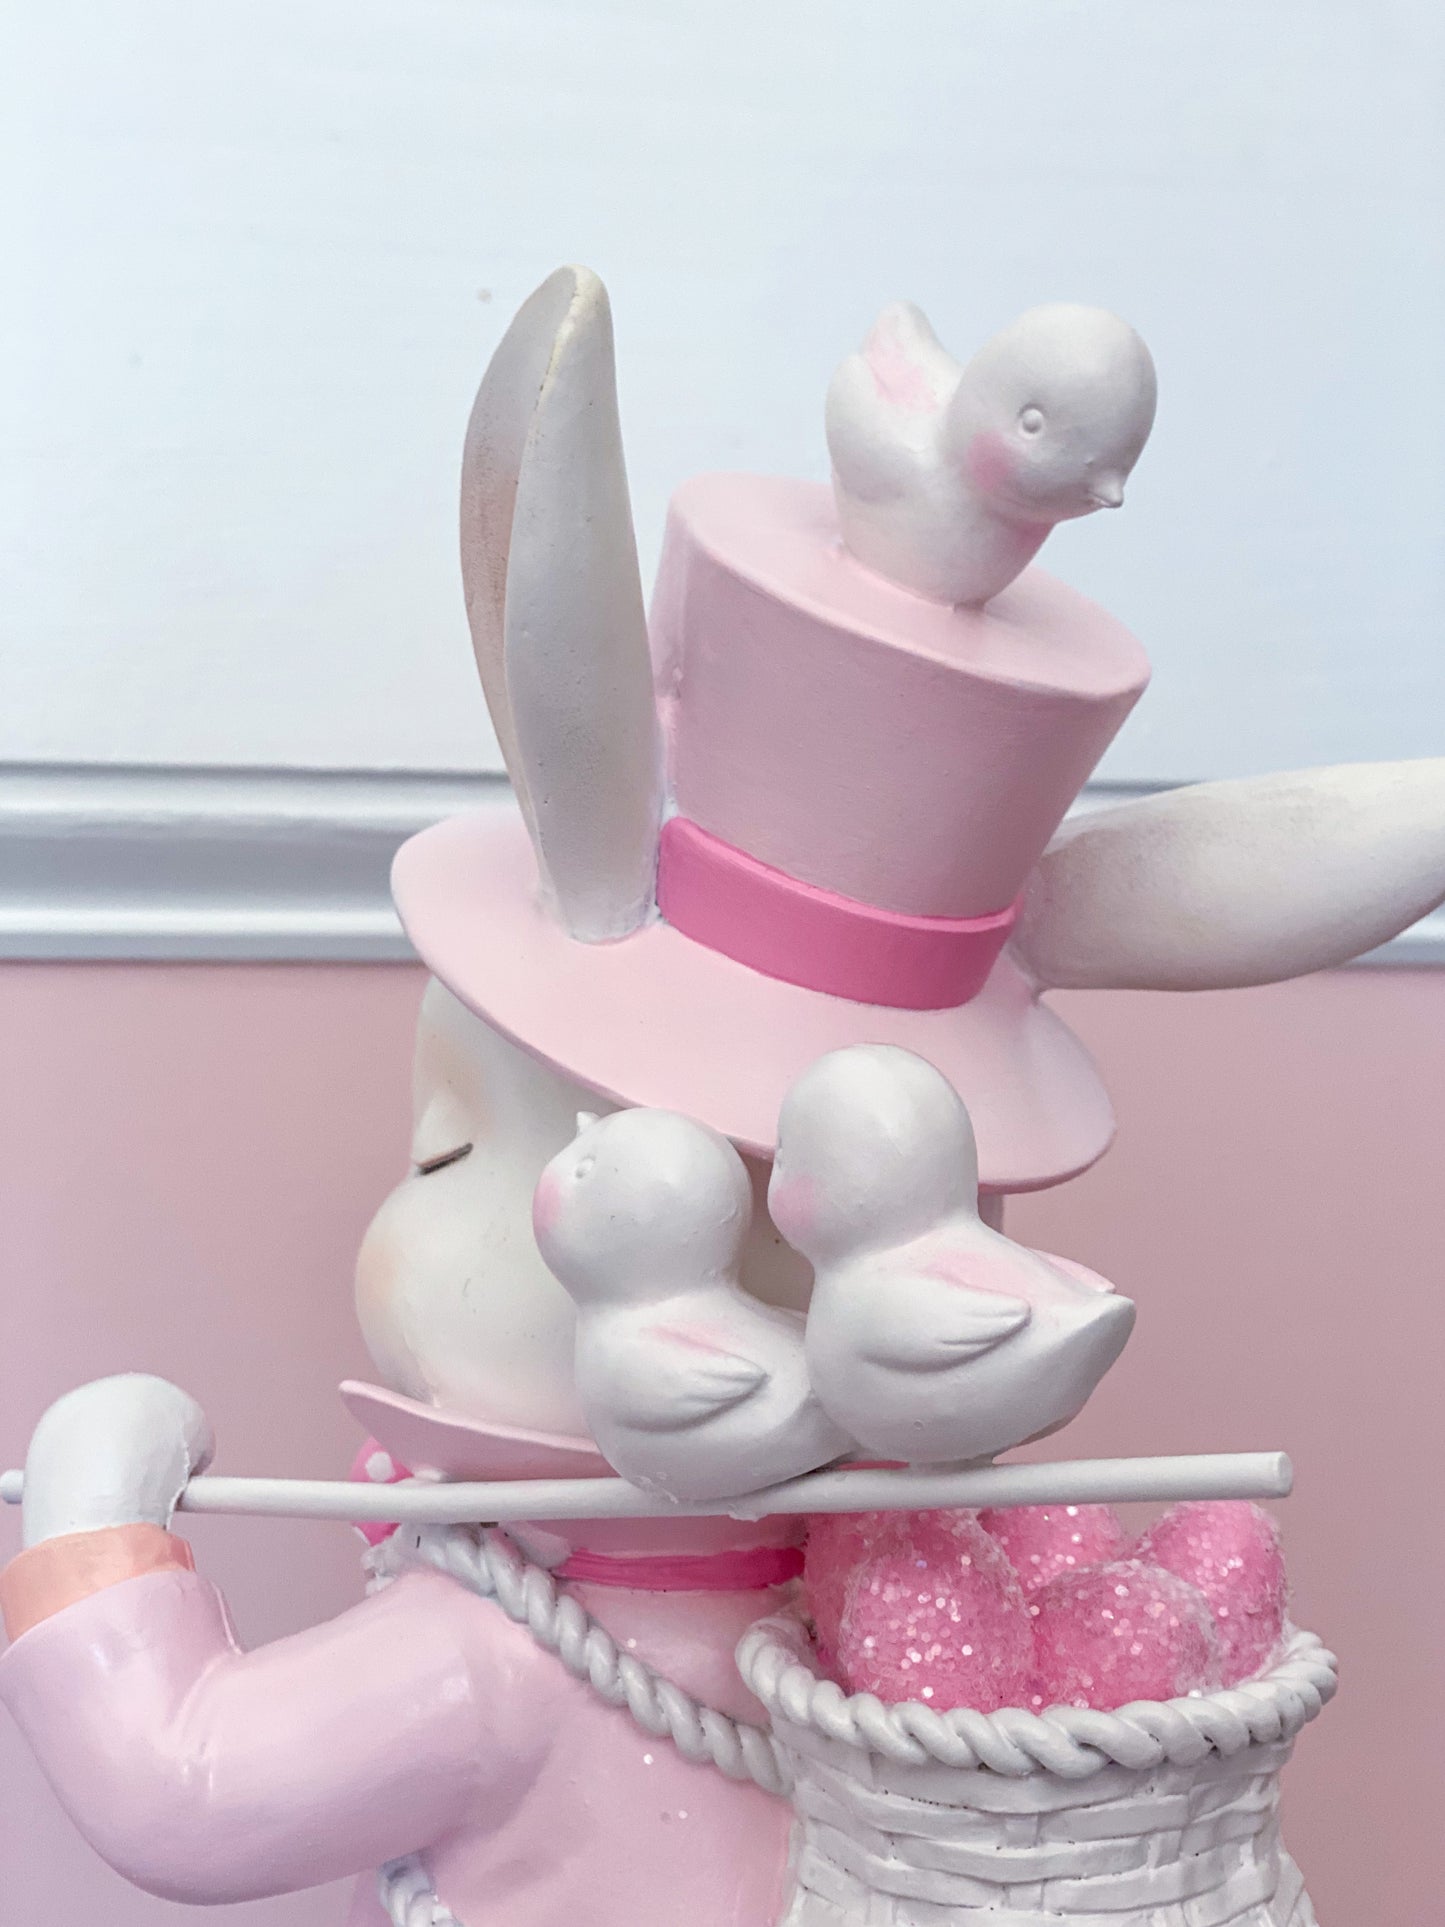 GLOW-UP COMMISSION: Bespoke Hand Painted Pastel Pink Mad Hatter Bunny Strolling with his chicks